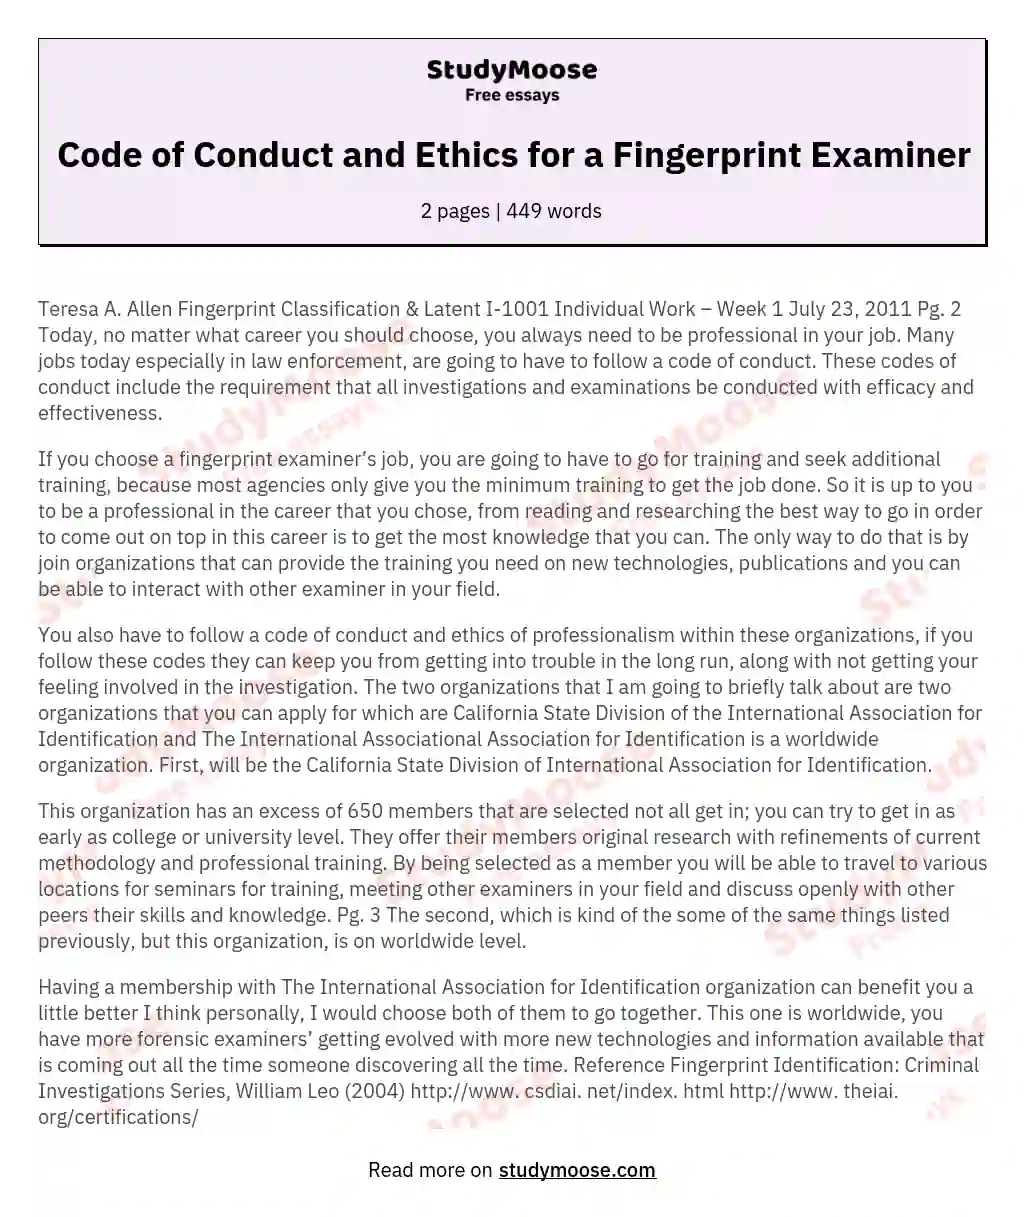 Code of Conduct and Ethics for a Fingerprint Examiner essay